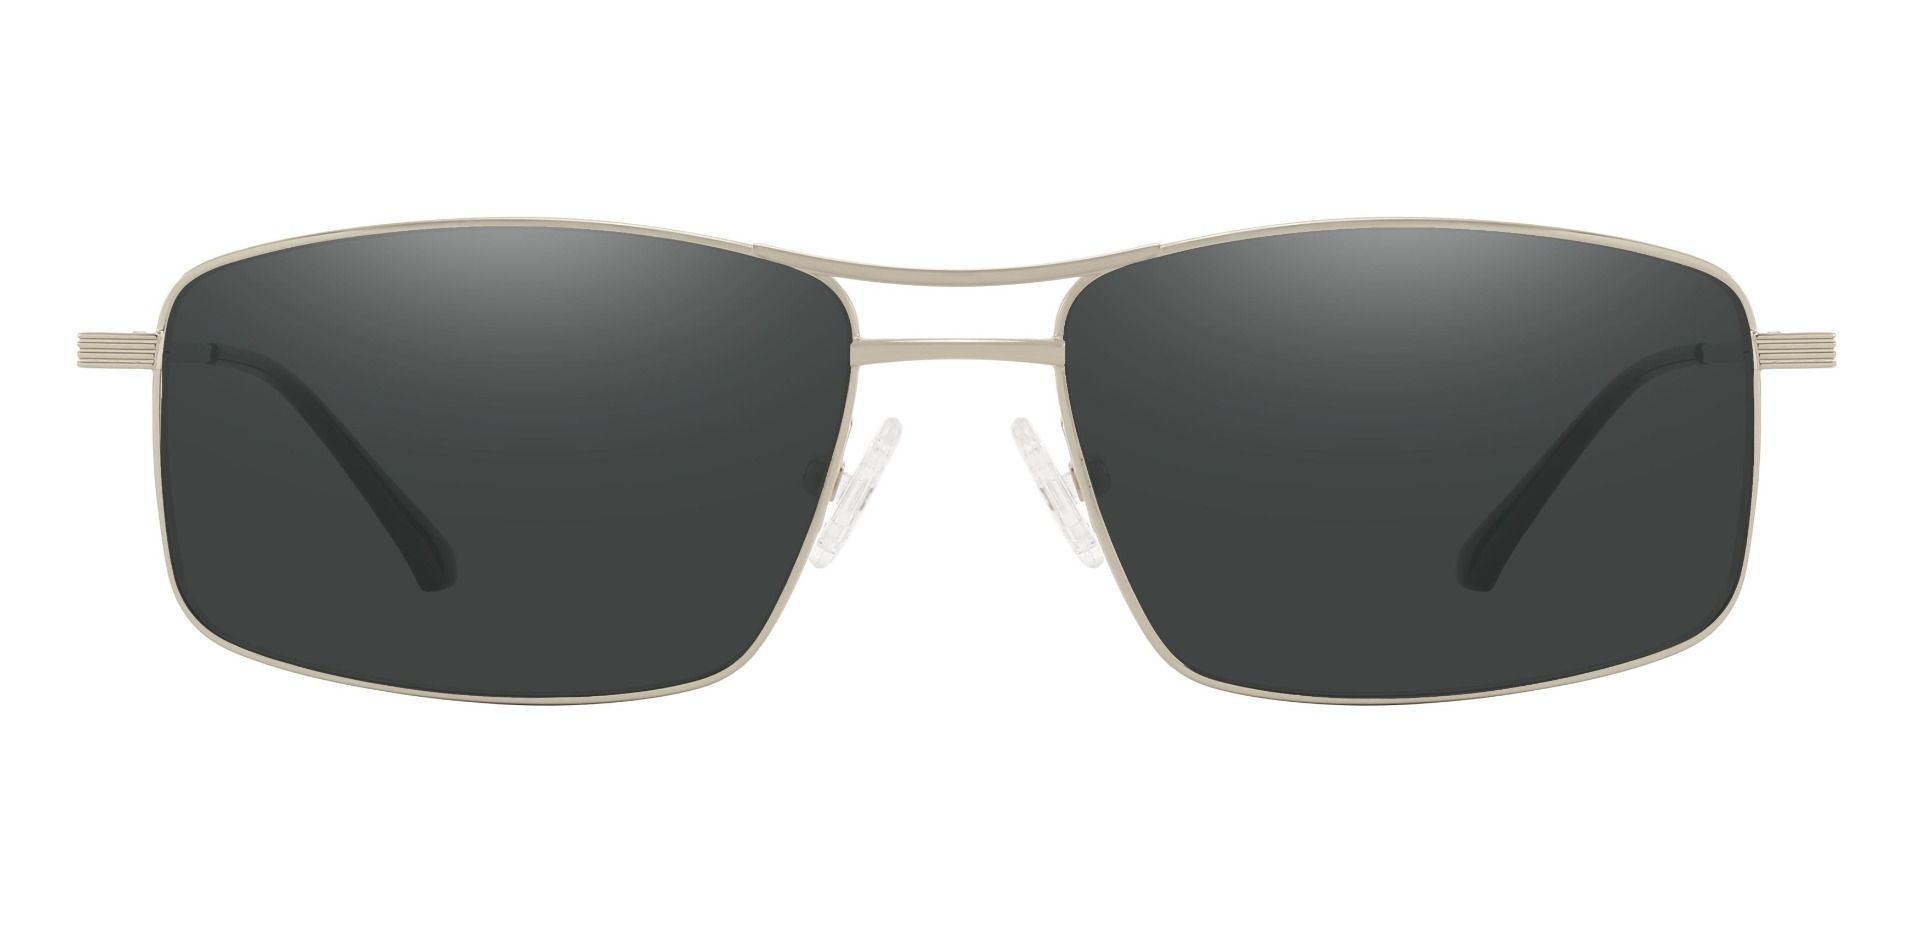 Cyril Aviator Reading Sunglasses - Gold Frame With Brown Lenses | Men's ...